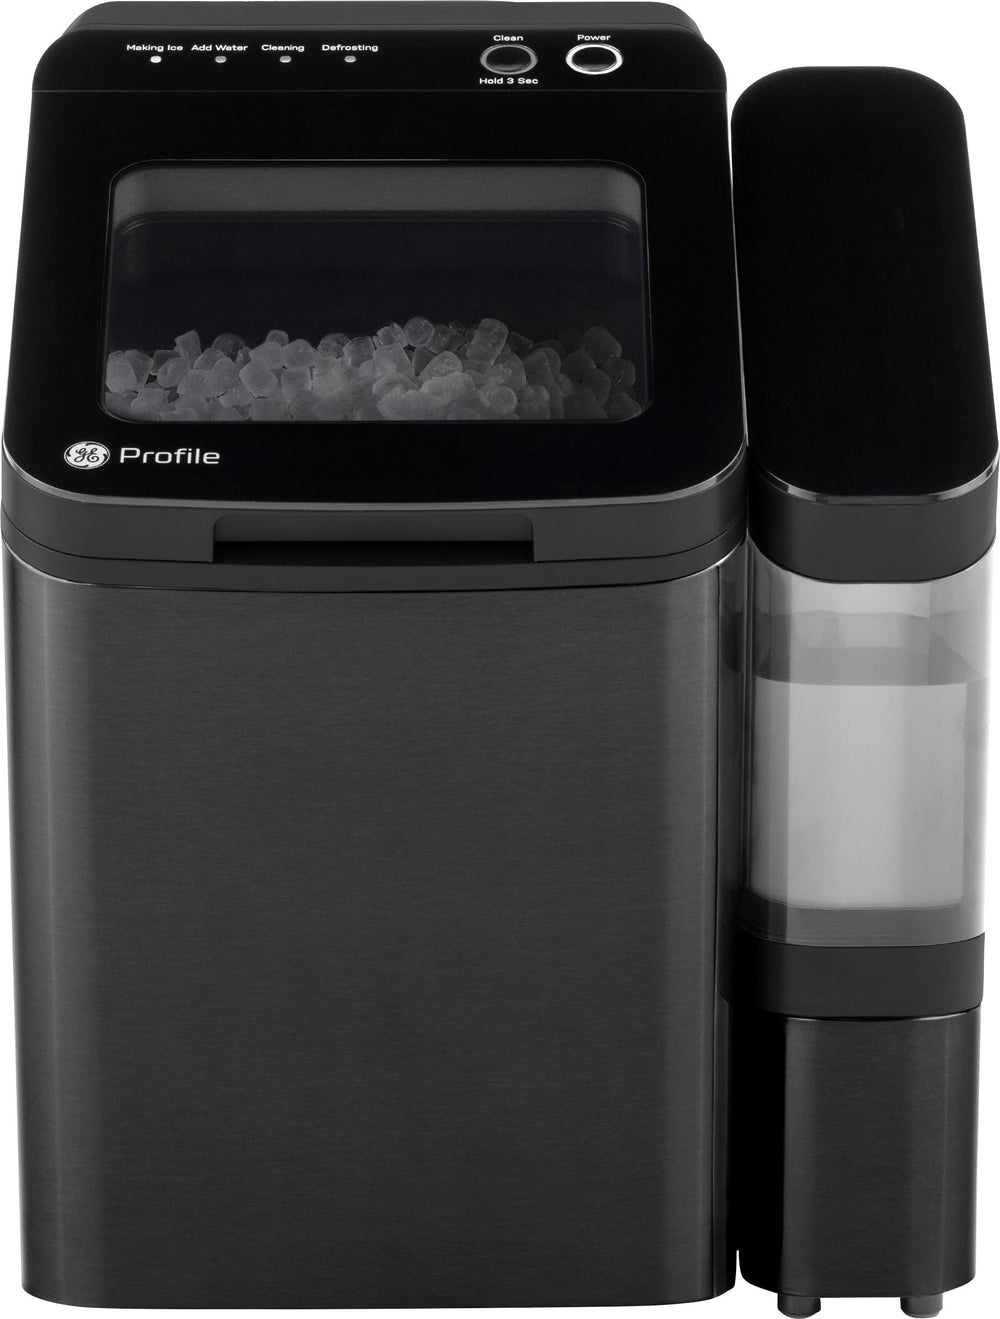 GE Profile - Opal 1.0 Nugget Ice Maker With Side Tank - Black_1